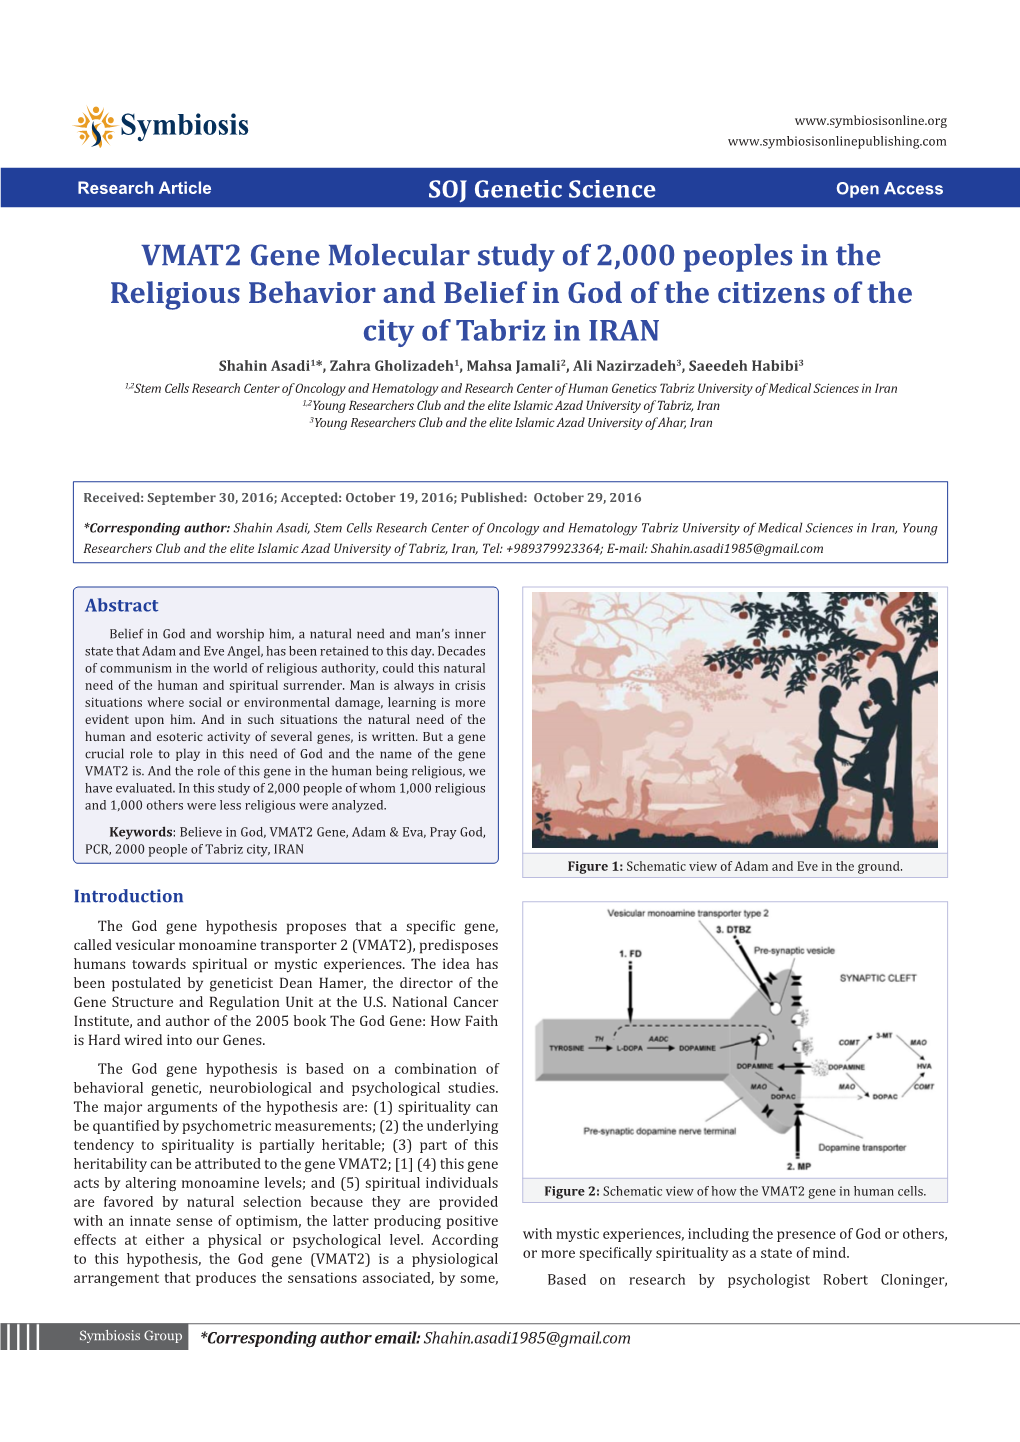 VMAT2 Gene Molecular Study of 2,000 Peoples in the Religious Behavior and Belief in God of the Citizens of the City of Tabriz In